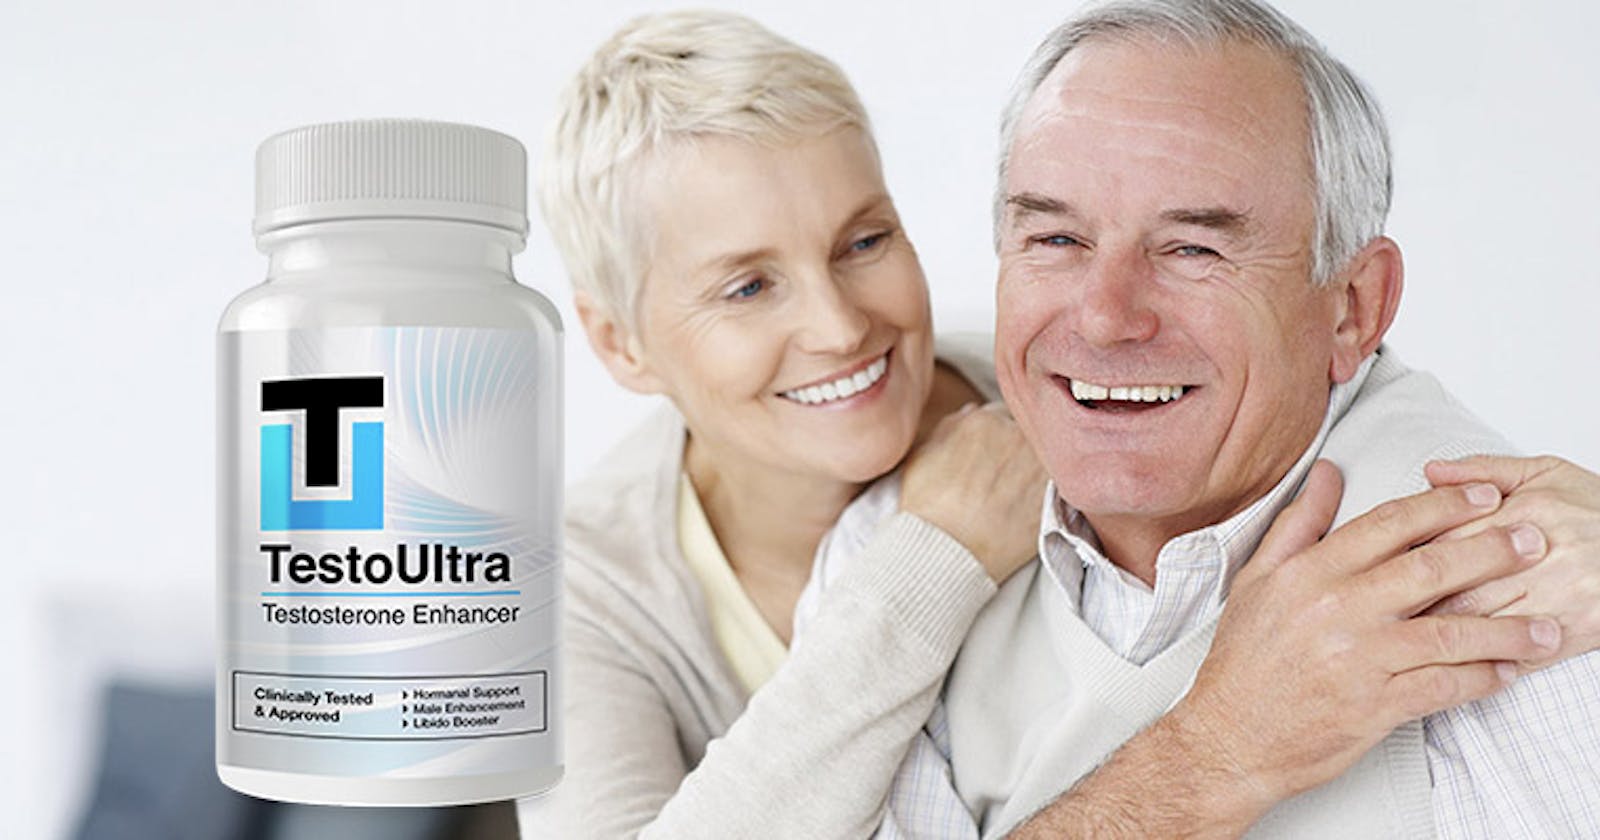 TestoUltra ZA Benefits, Uses, Work, Results & Where To Buy?